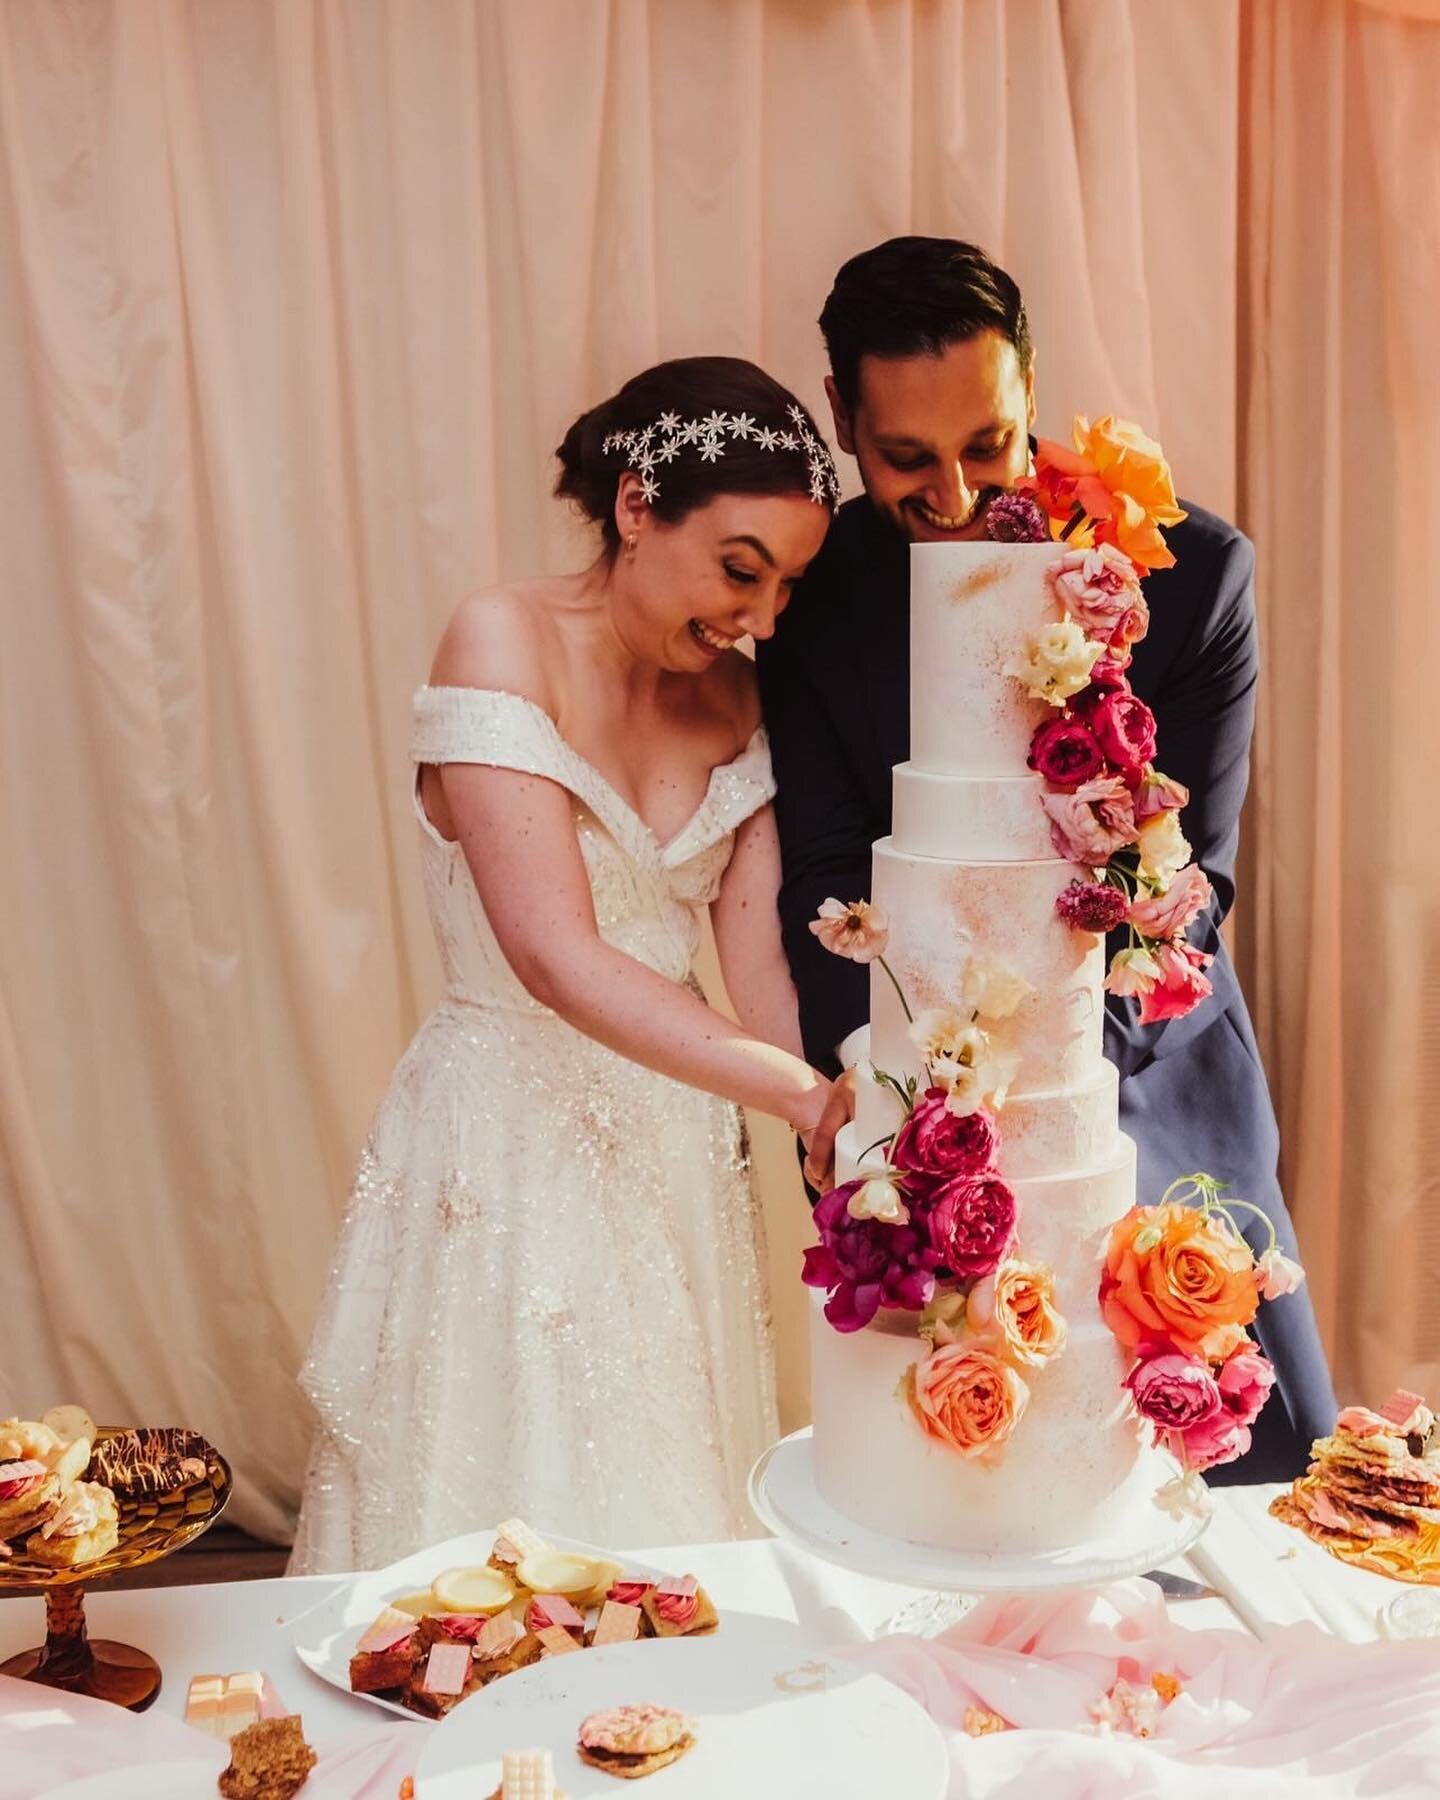 Millie and Amar ❤️🧡💛

6 tiers, 500 desserts and so much love that the room was bursting 💛

The reason I love my job so much and I&rsquo;m so proud of what I do is how what can be seen (and often is) as frivolous and indulgent - your wedding day - 